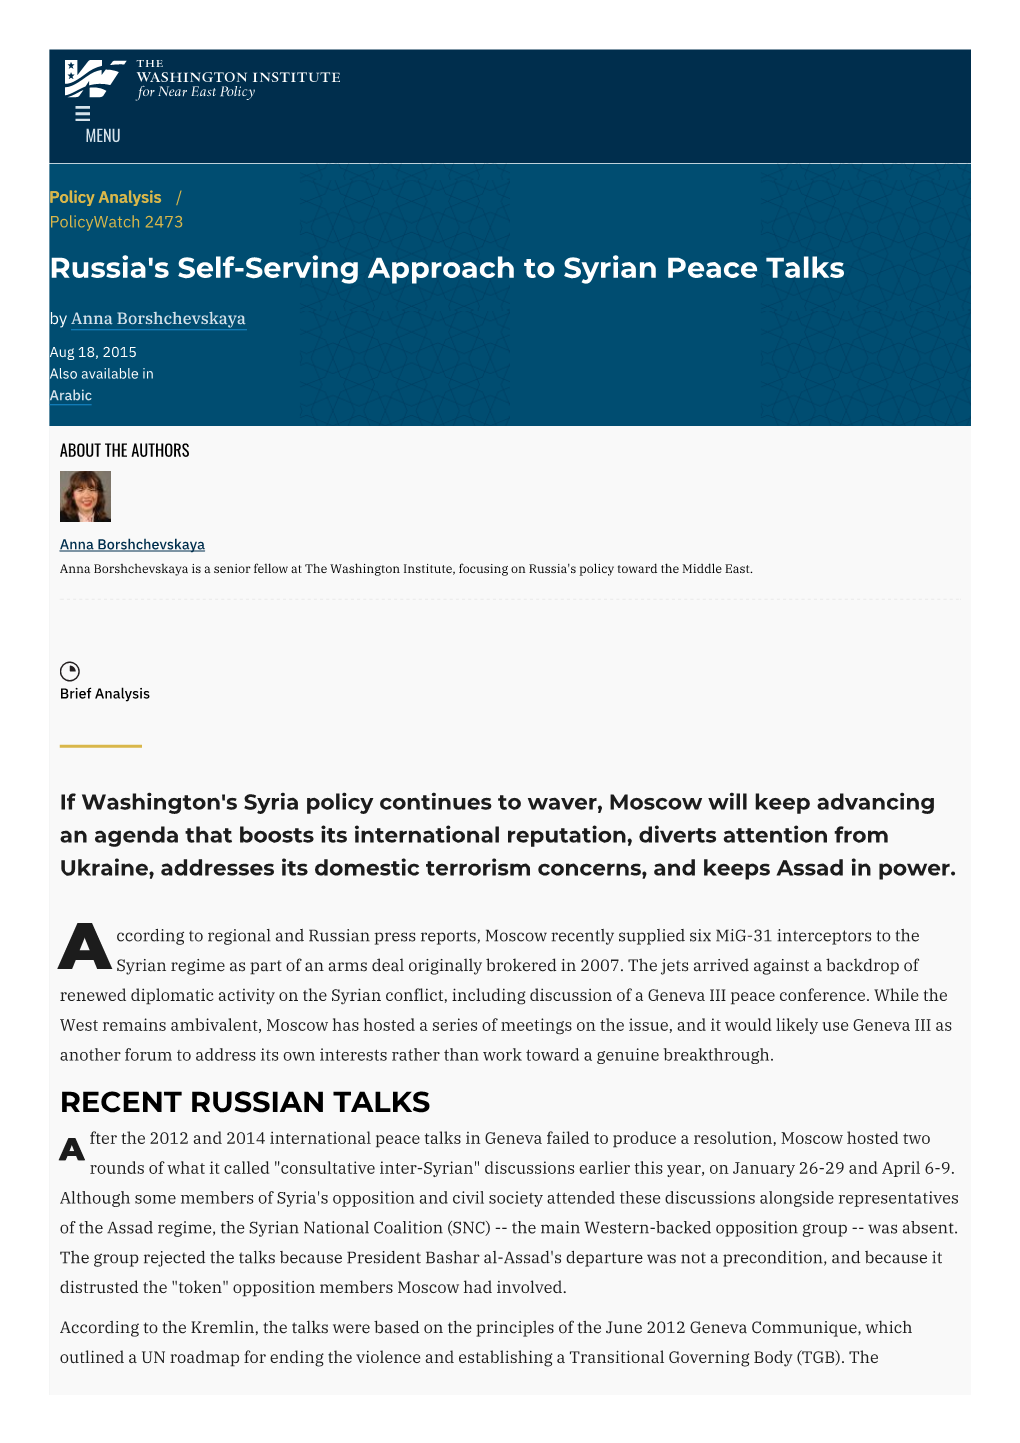 Russia's Self-Serving Approach to Syrian Peace Talks | The